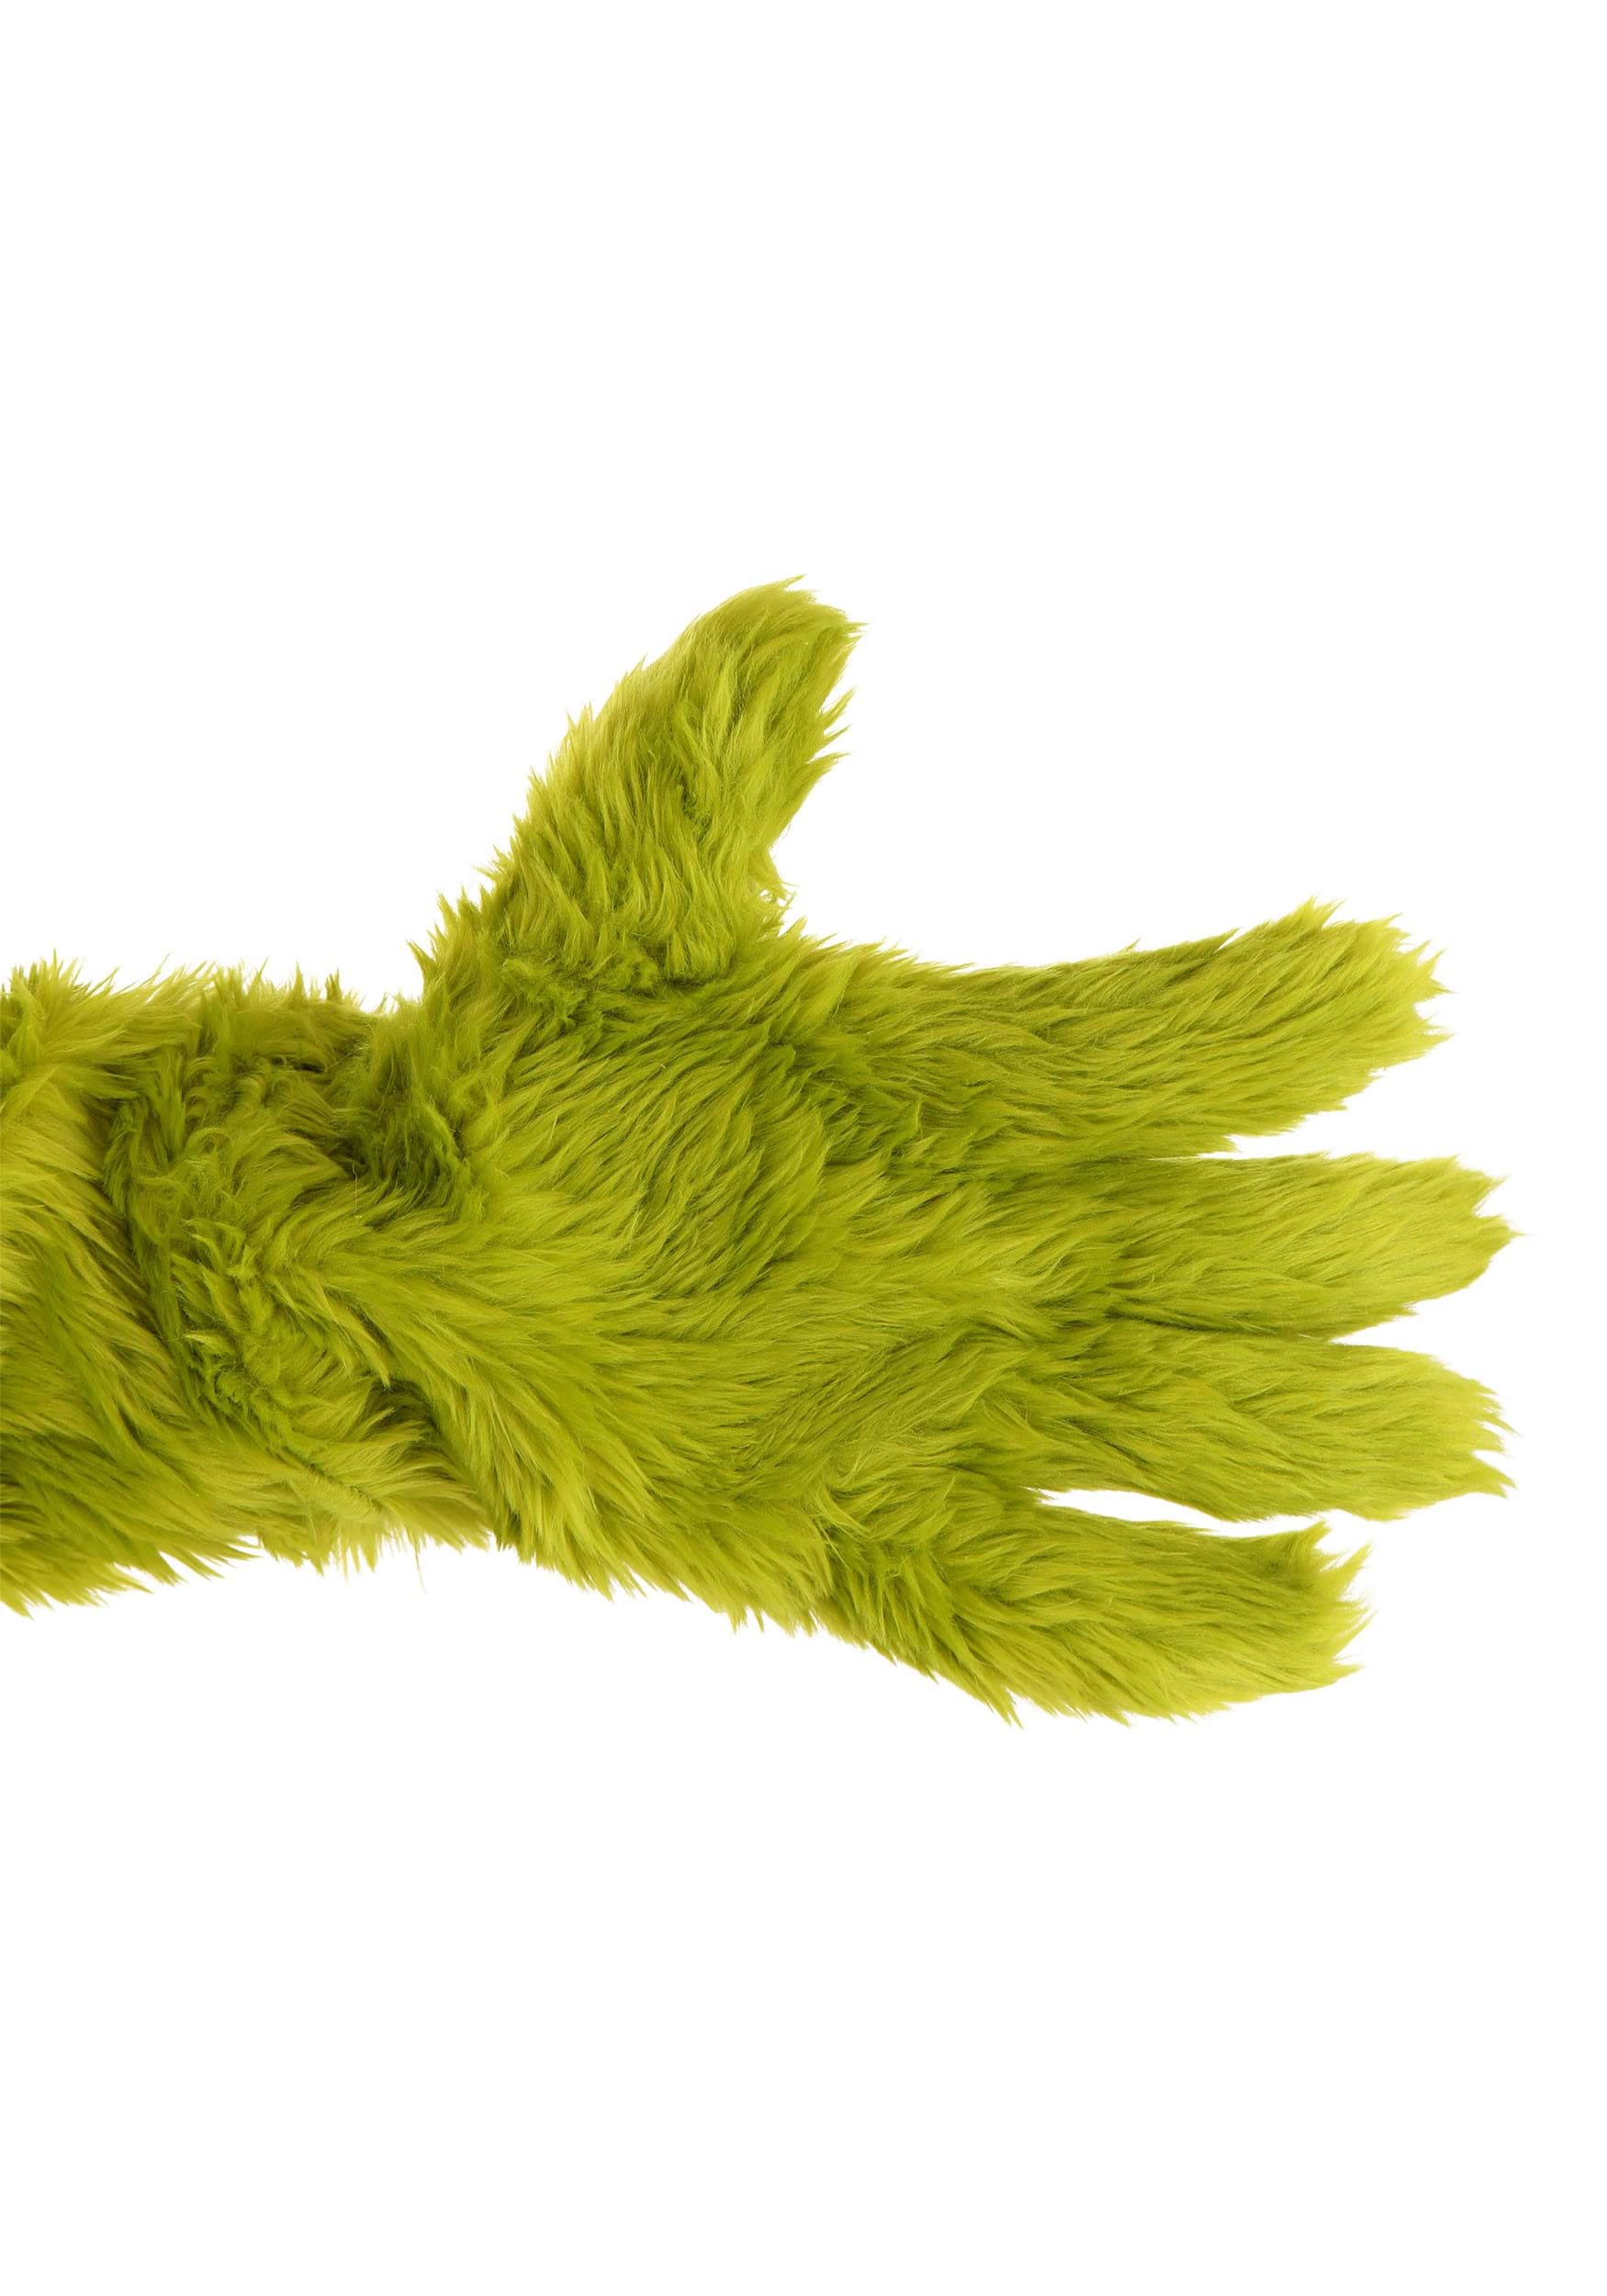 https://images.fun.com/products/75748/2-1-227679/the-grinch-adult-deluxe-hands-alt-1.jpg